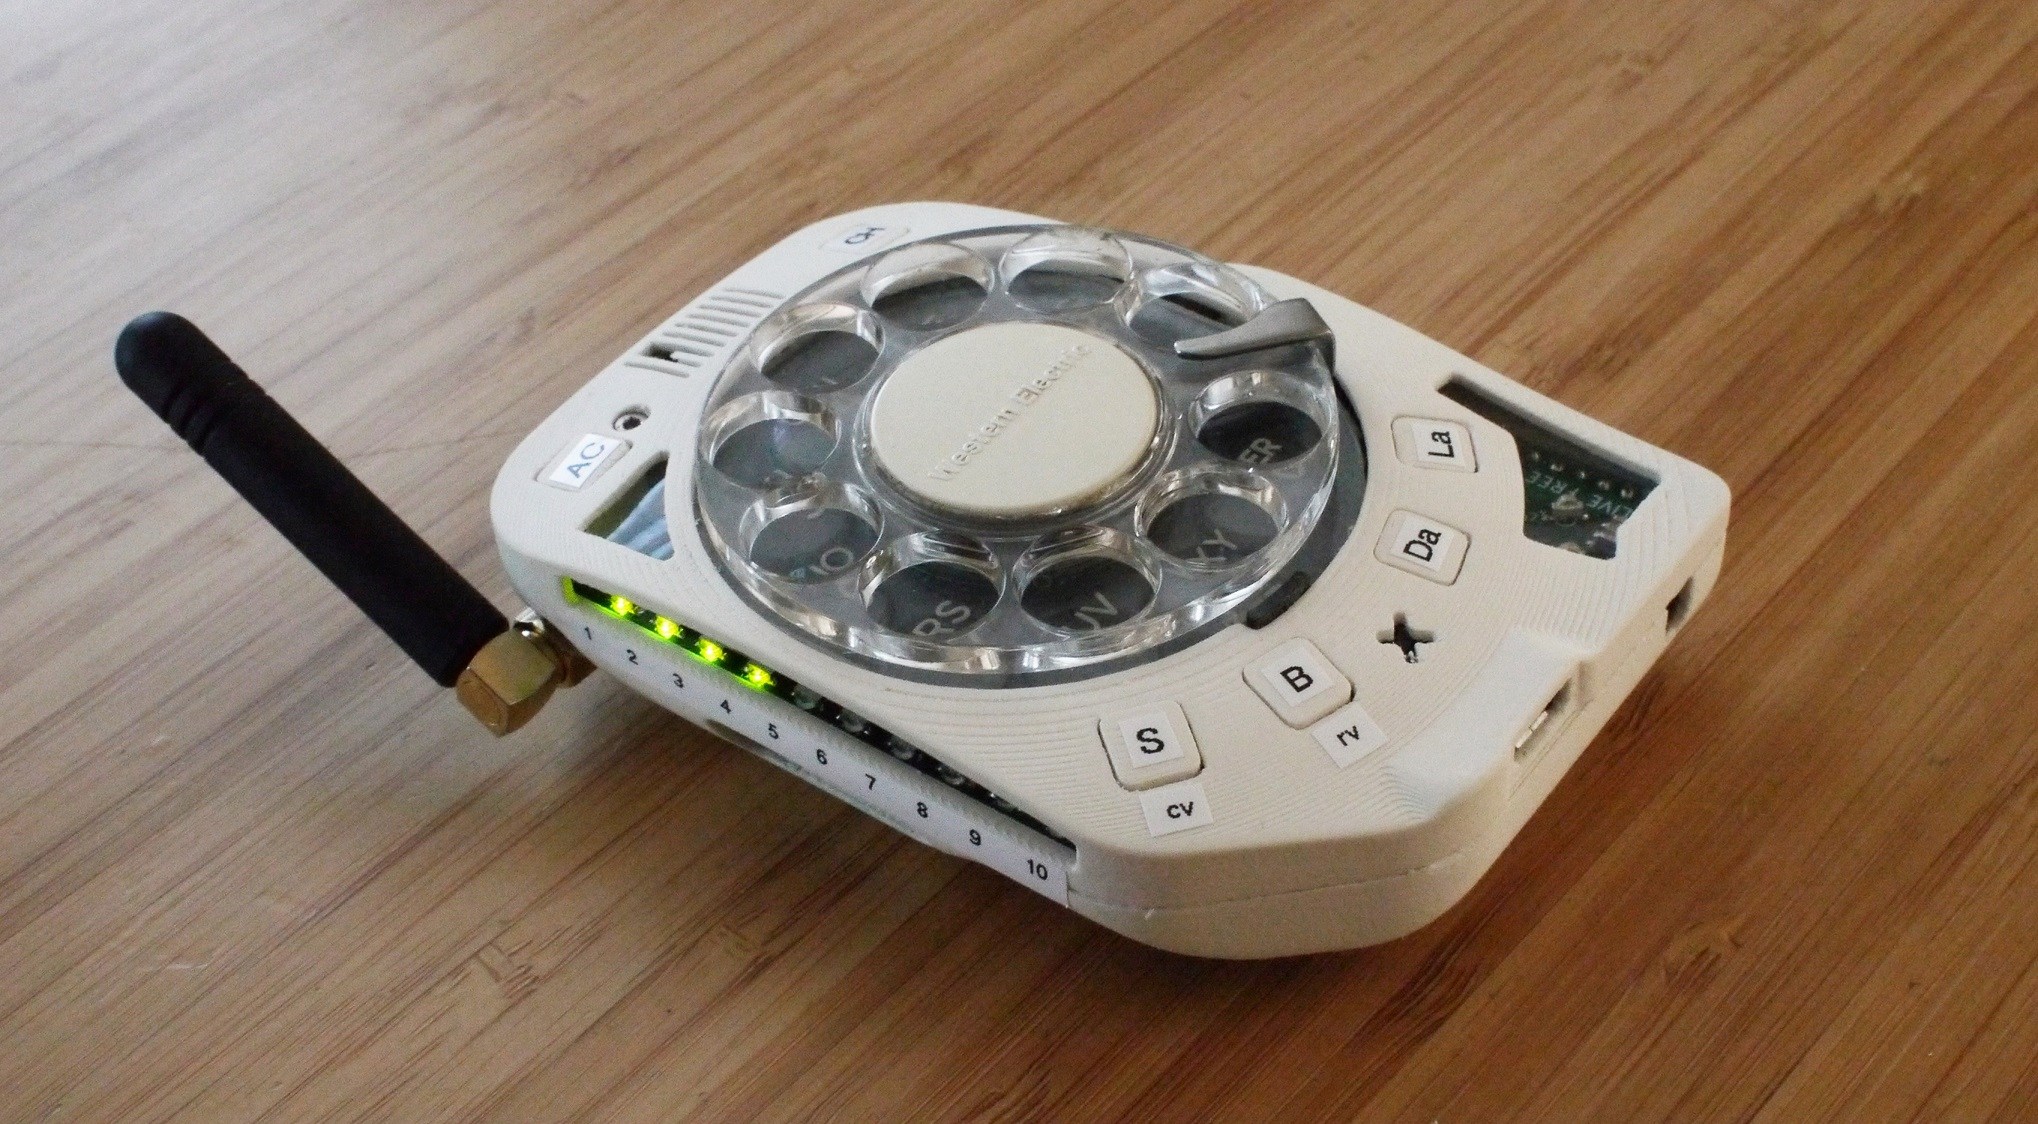 This cell phone with the classic dial disc will revive the nostalgia of more than one